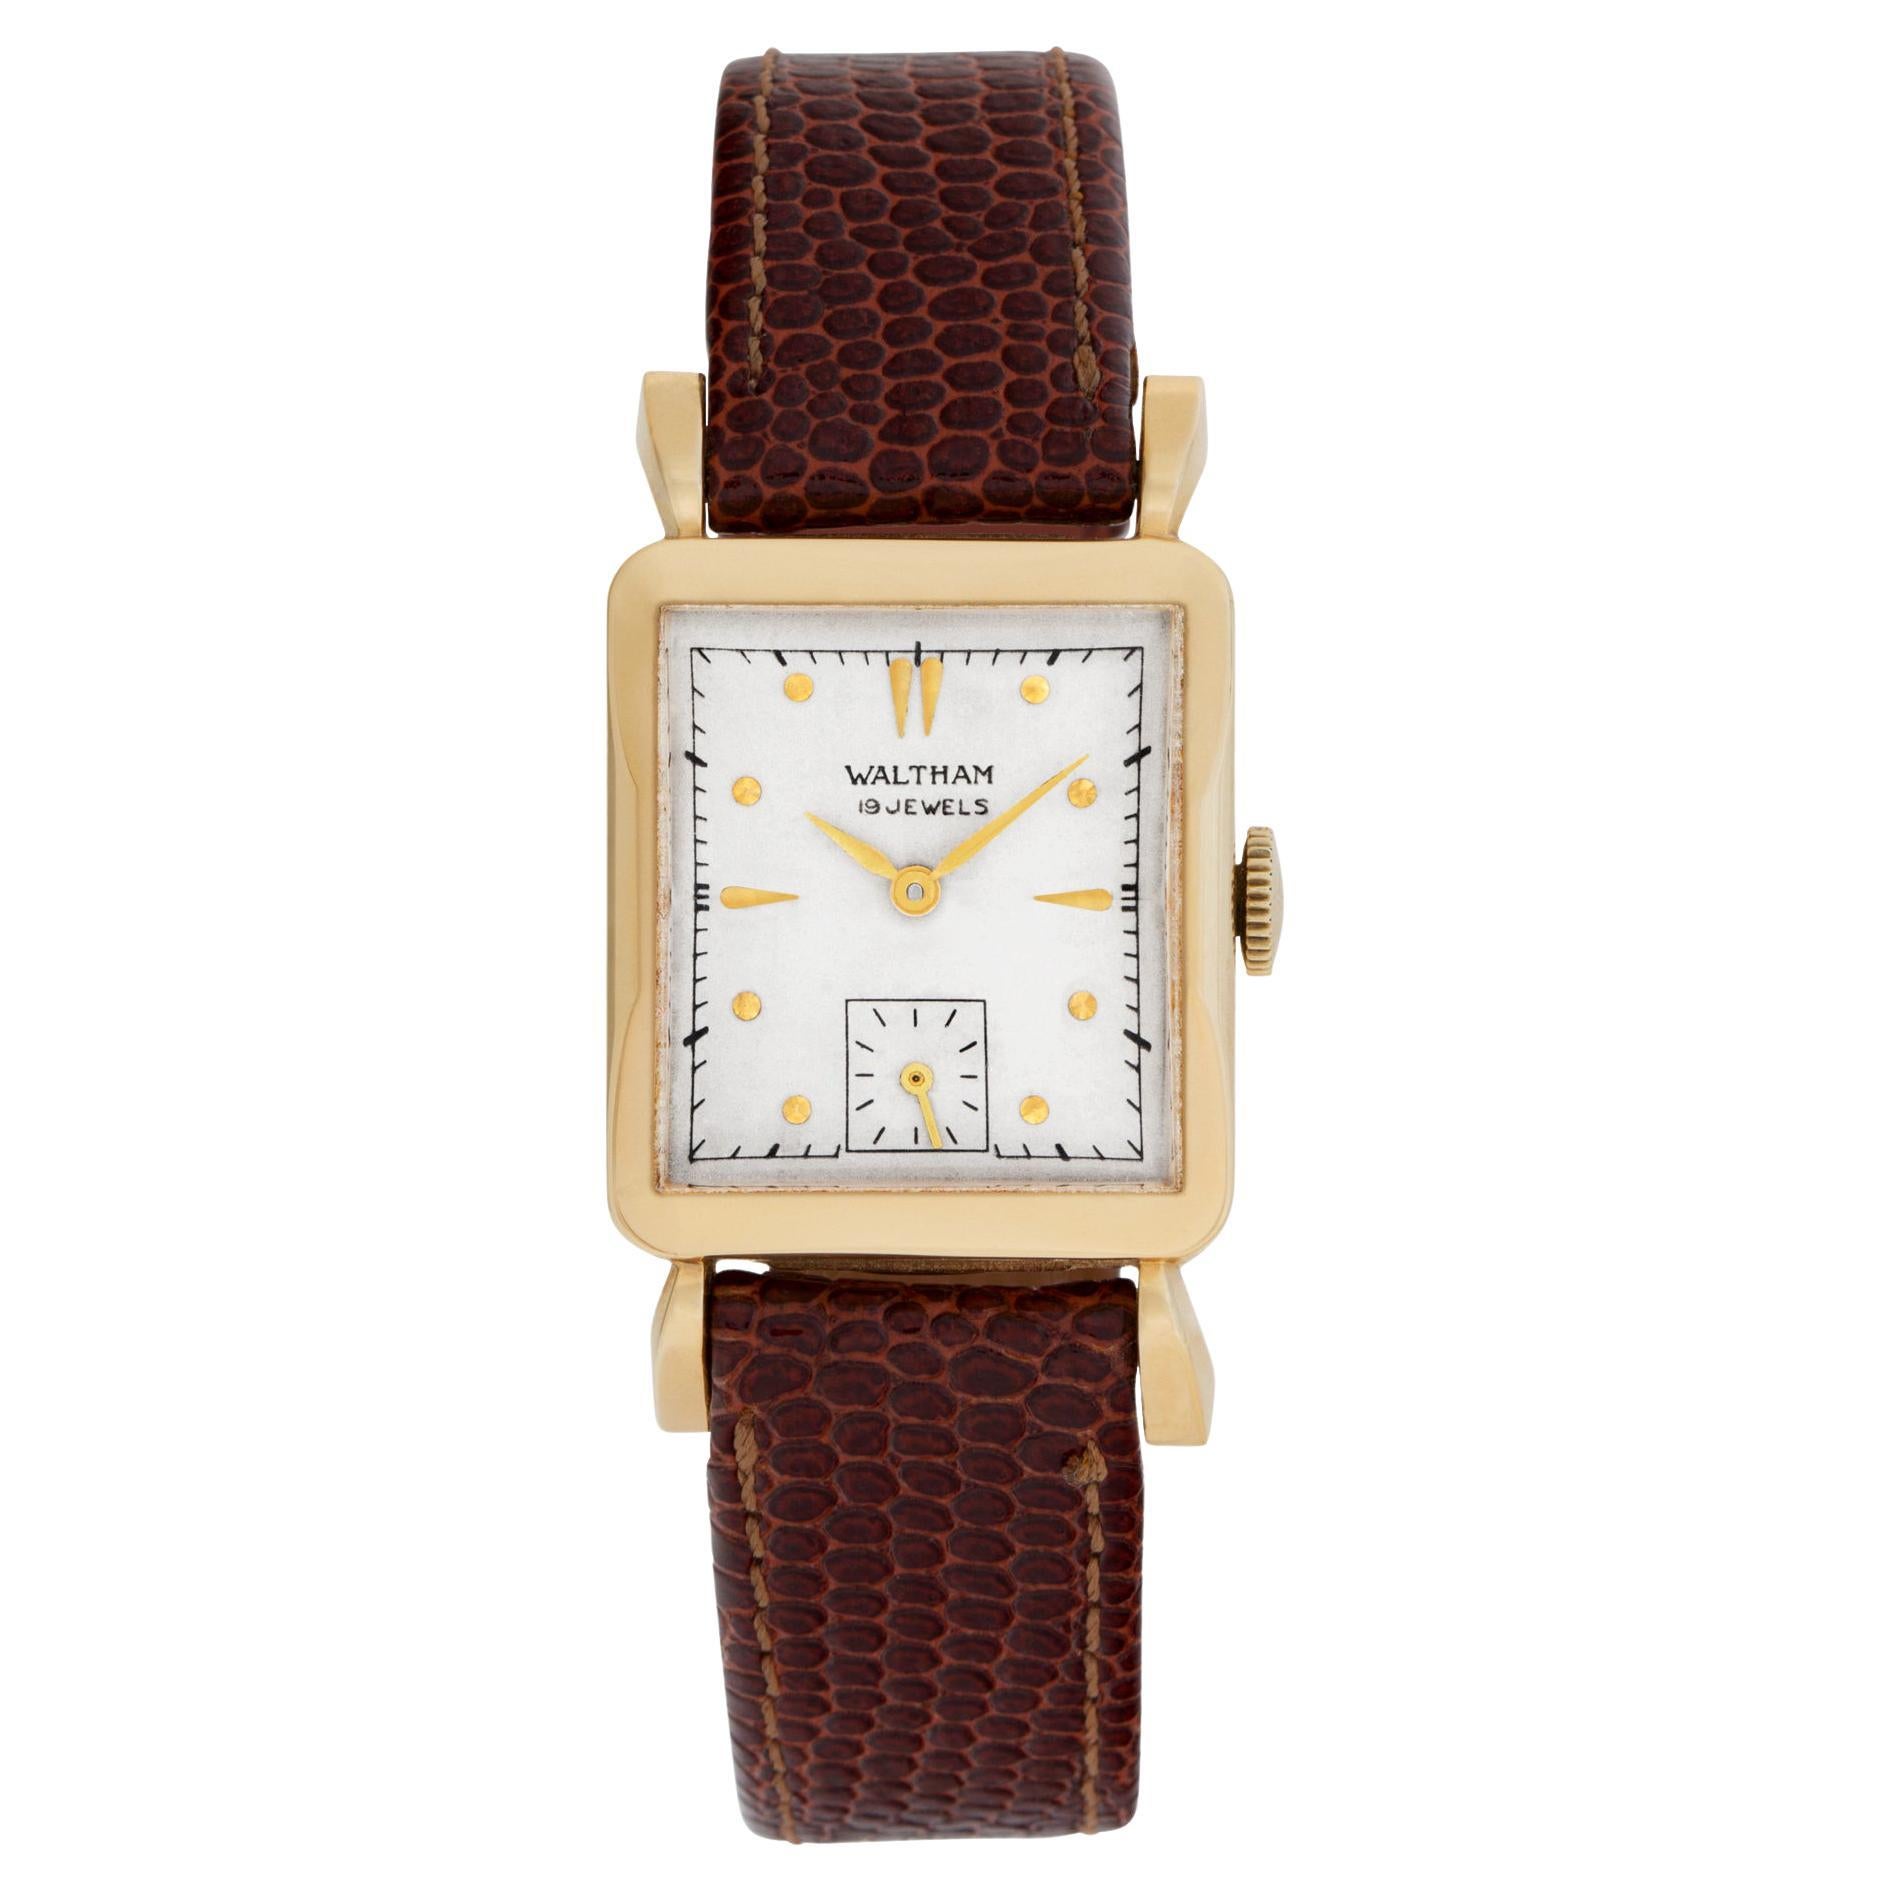 Waltham Watch 14k Yellow Gold Case Manual For Sale